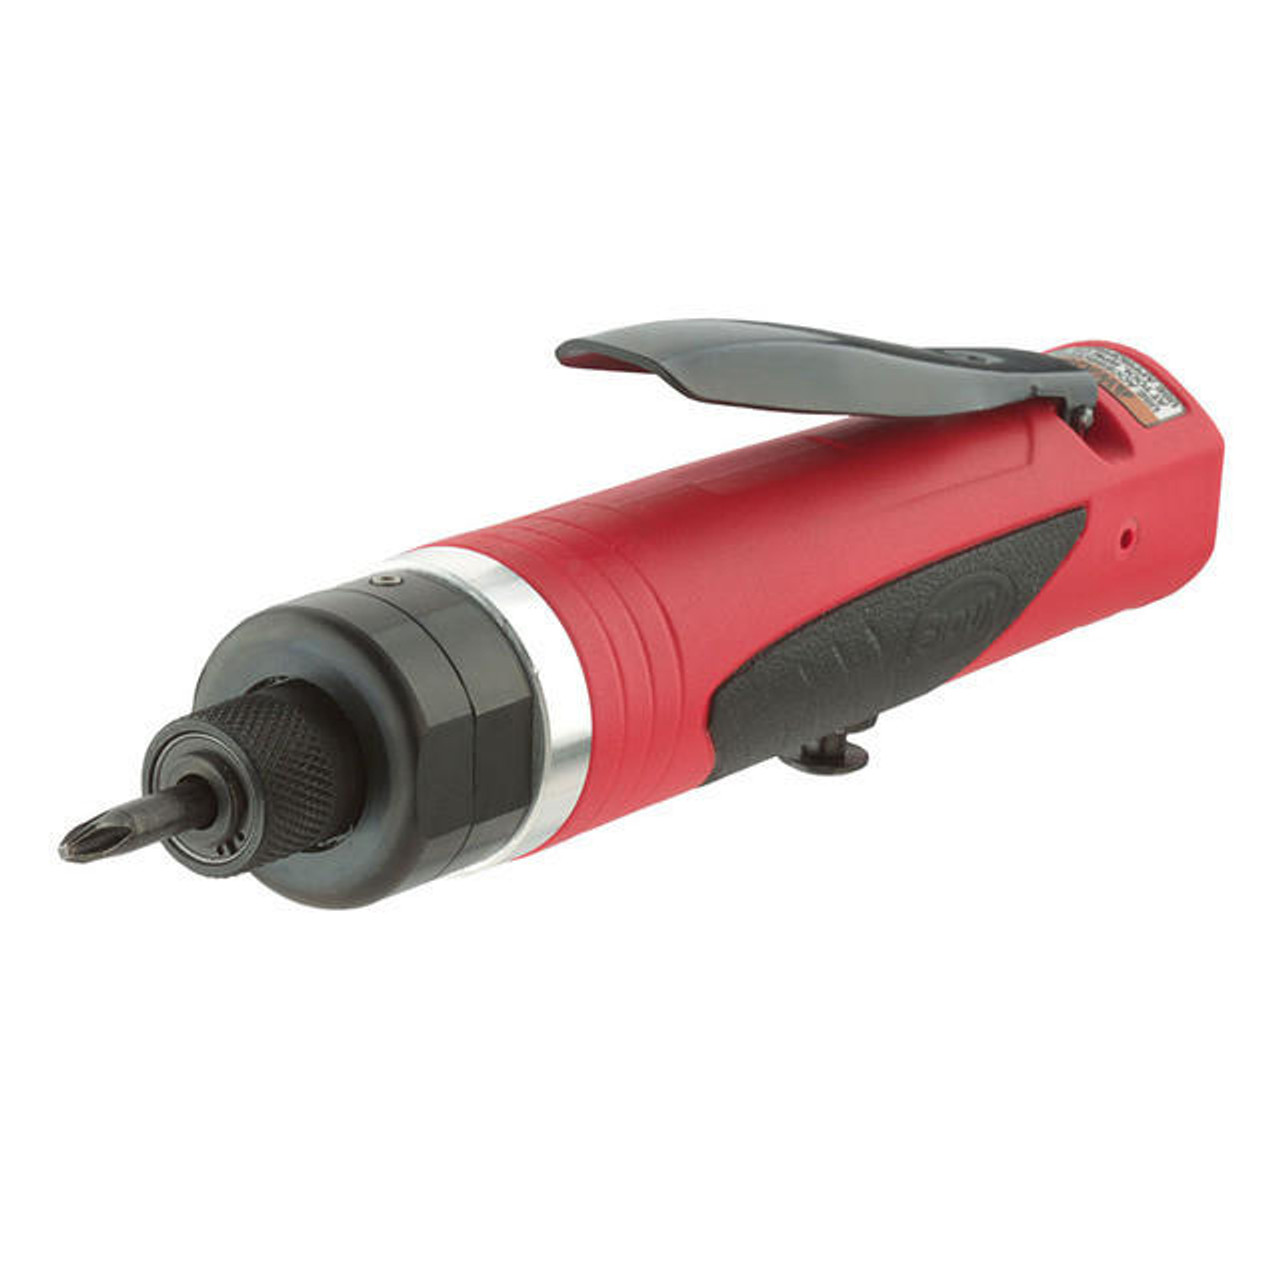  Sioux Tools SSD10S3S Stall Clutch Inline Screwdriver | 300 RPM | 400 in.-lb. Max Torque 